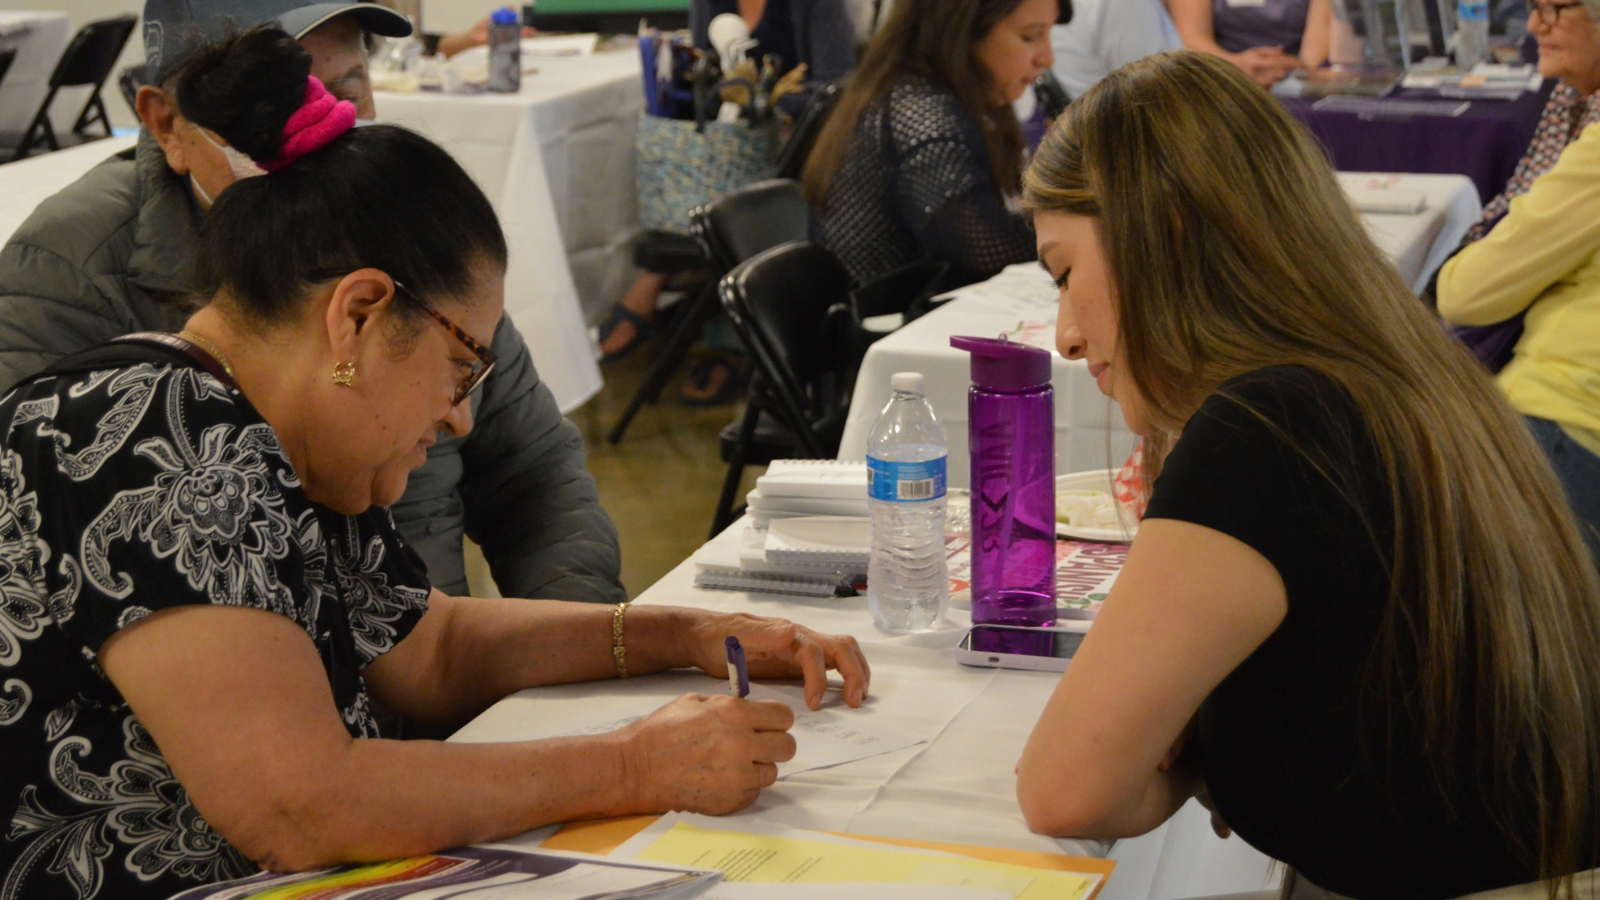 Three people sit at a table during a Brain Health fair to do cognitive testing.